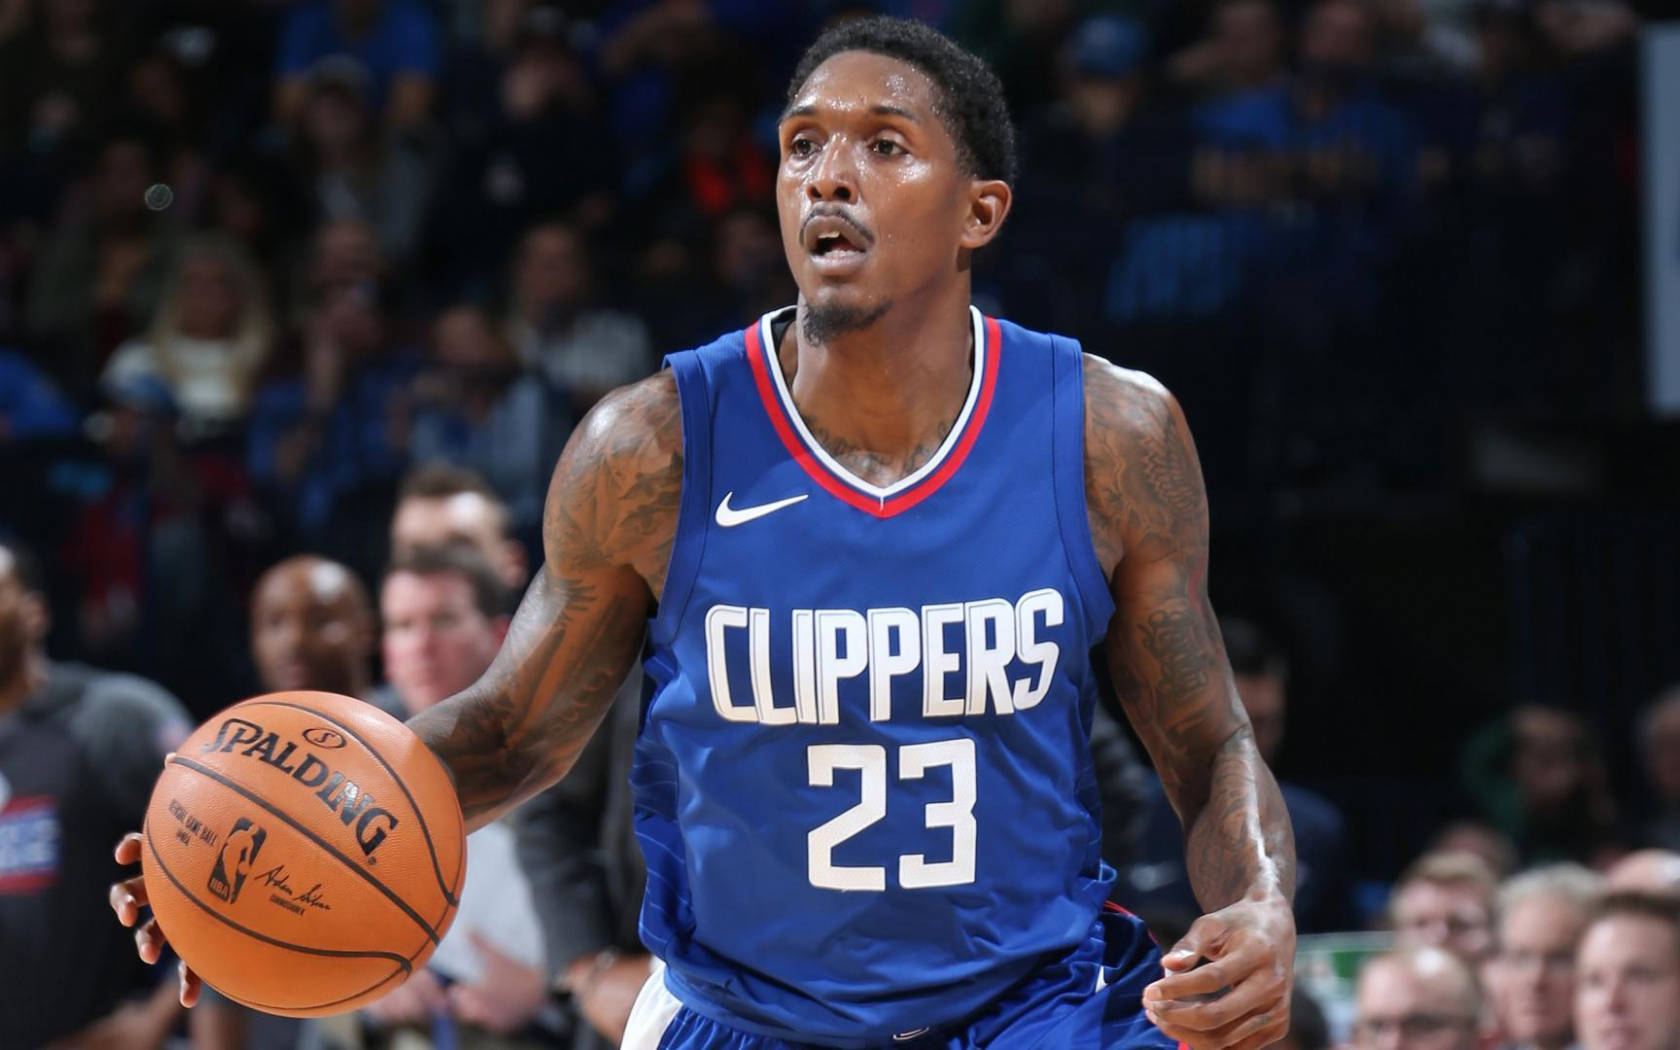 Lou Williams Bright Blue Clippers Jersey Background